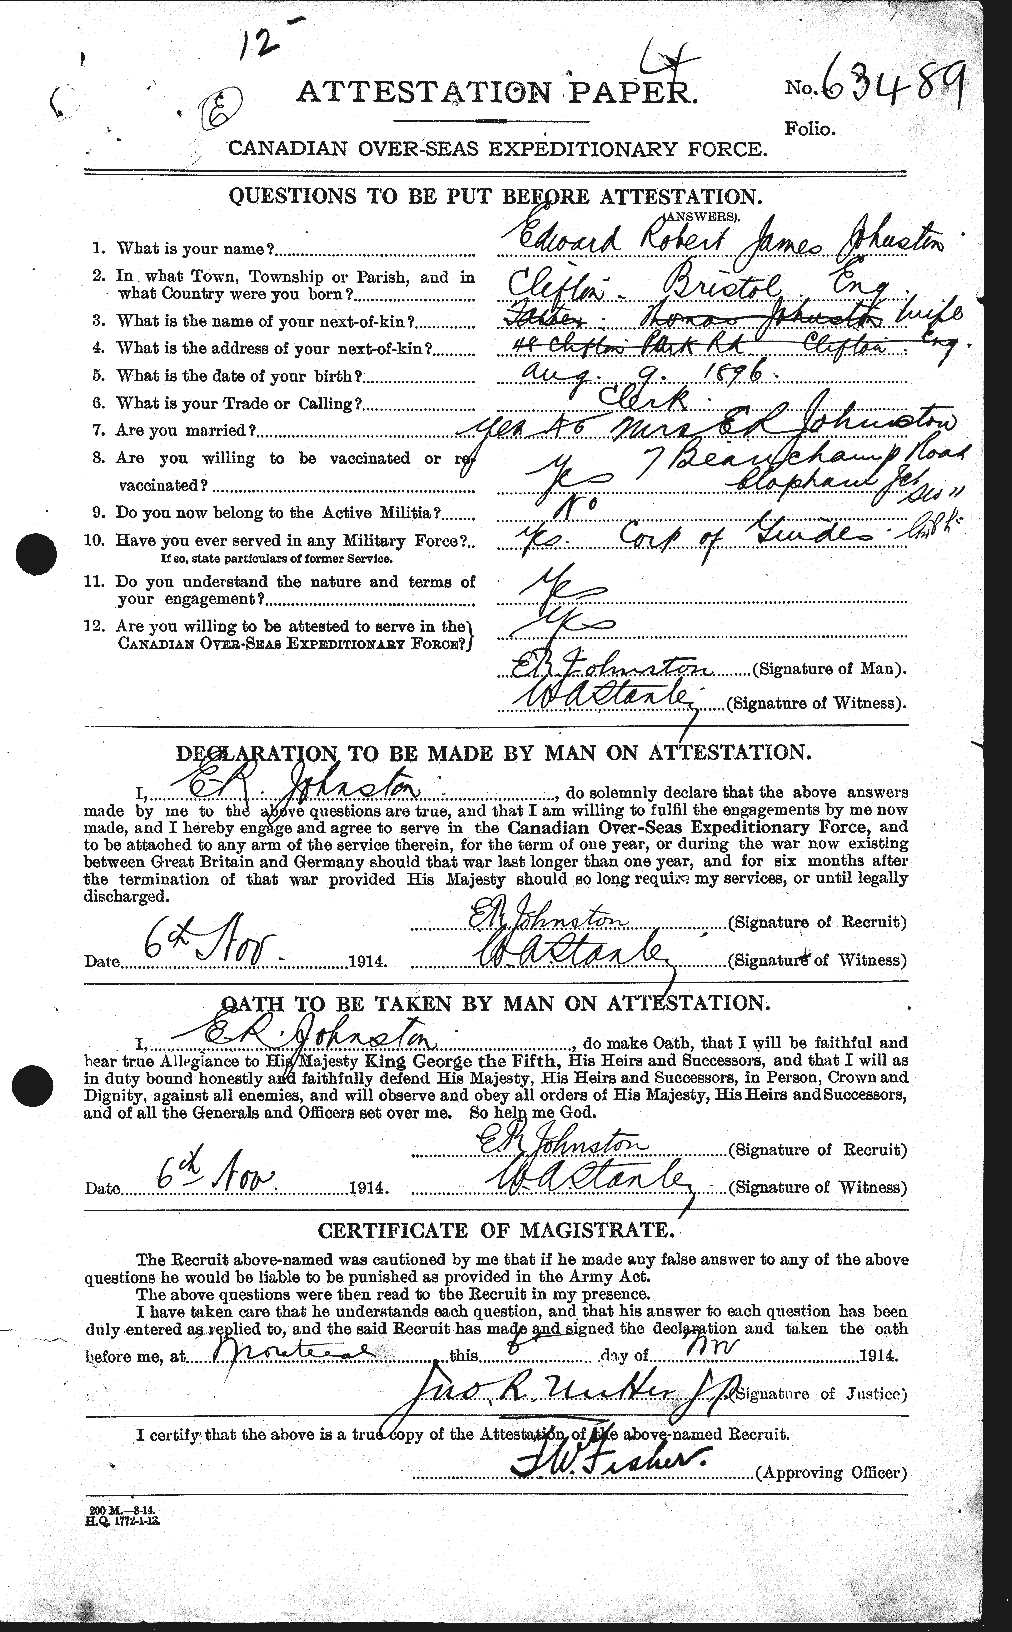 Personnel Records of the First World War - CEF 423234a